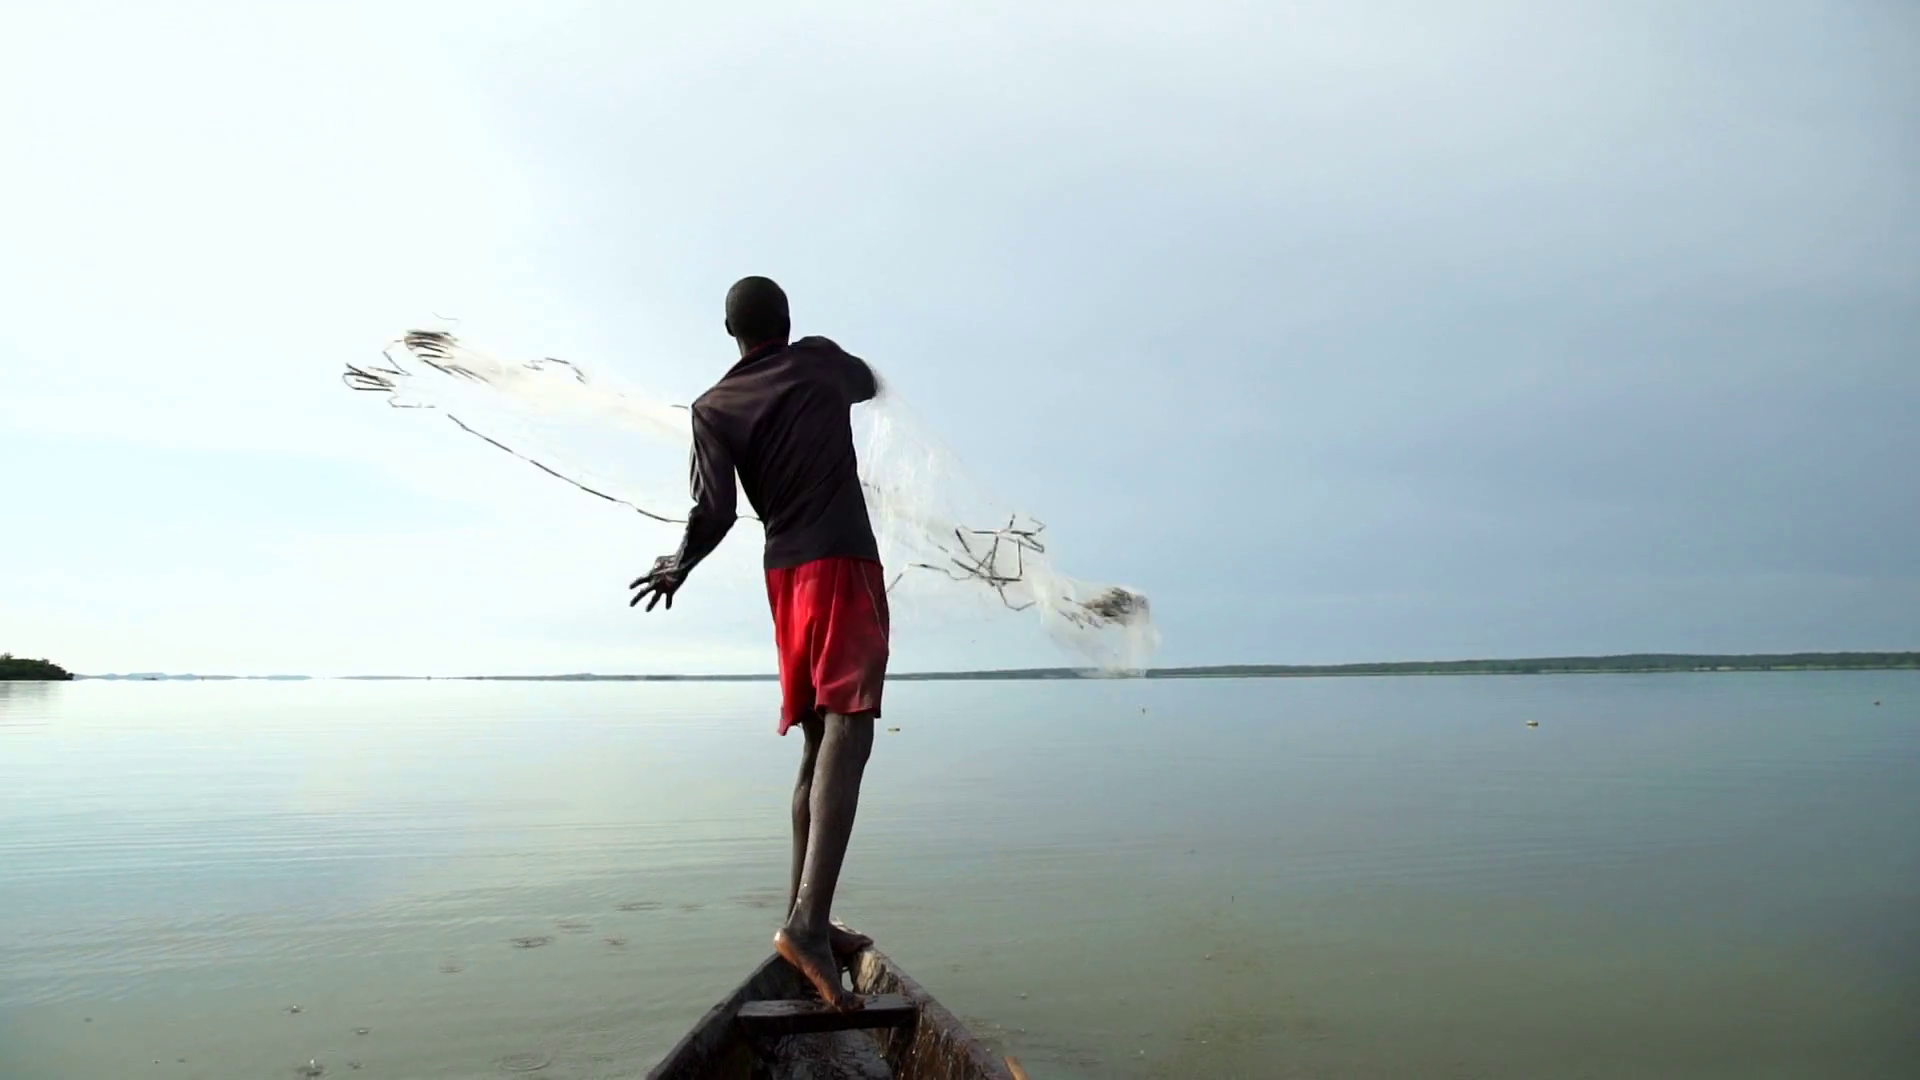 An African fisherman casts with skill a wide fishing net on his ...